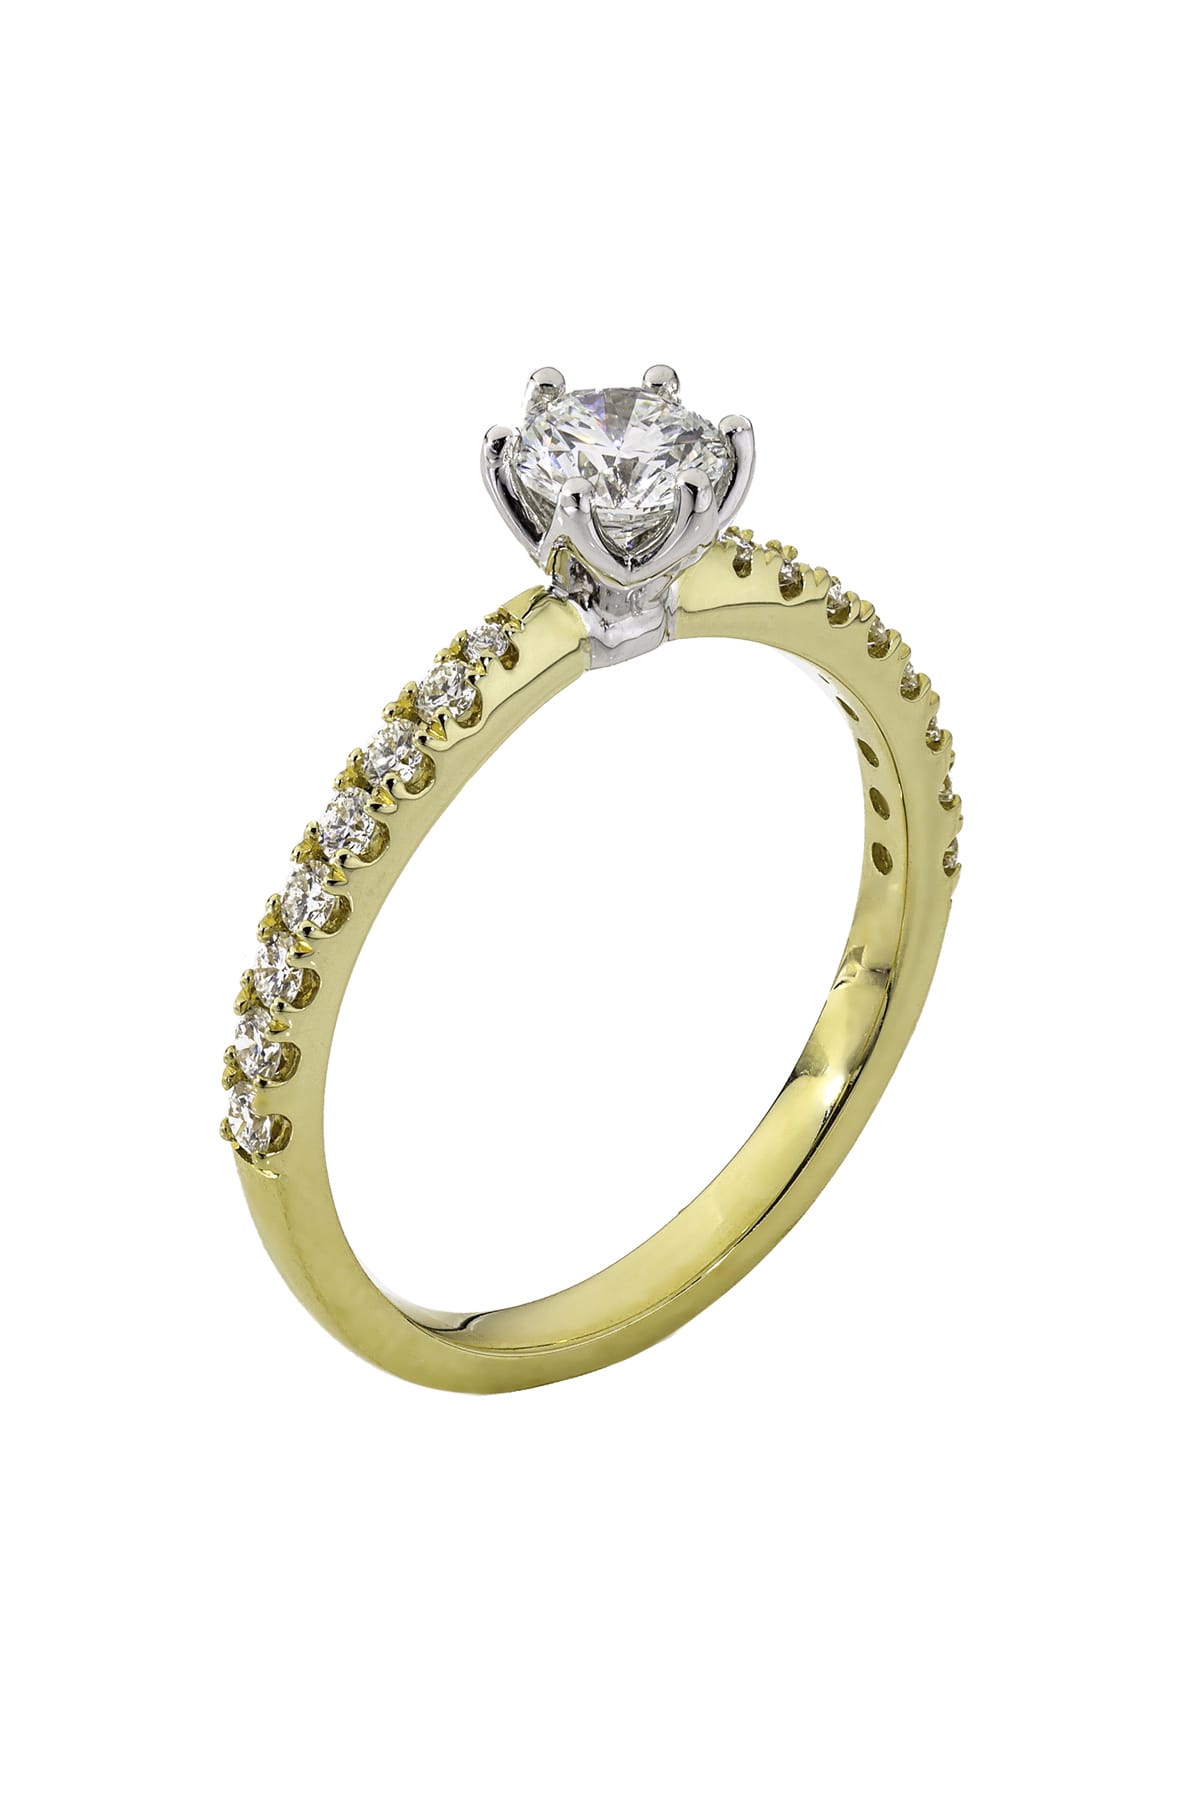 18 Carat Gold And 0.70 Carat Diamond Engagement Ring with Diamond Band available at LeGassick Diamonds and Jewellery Gold Coast, Australia.